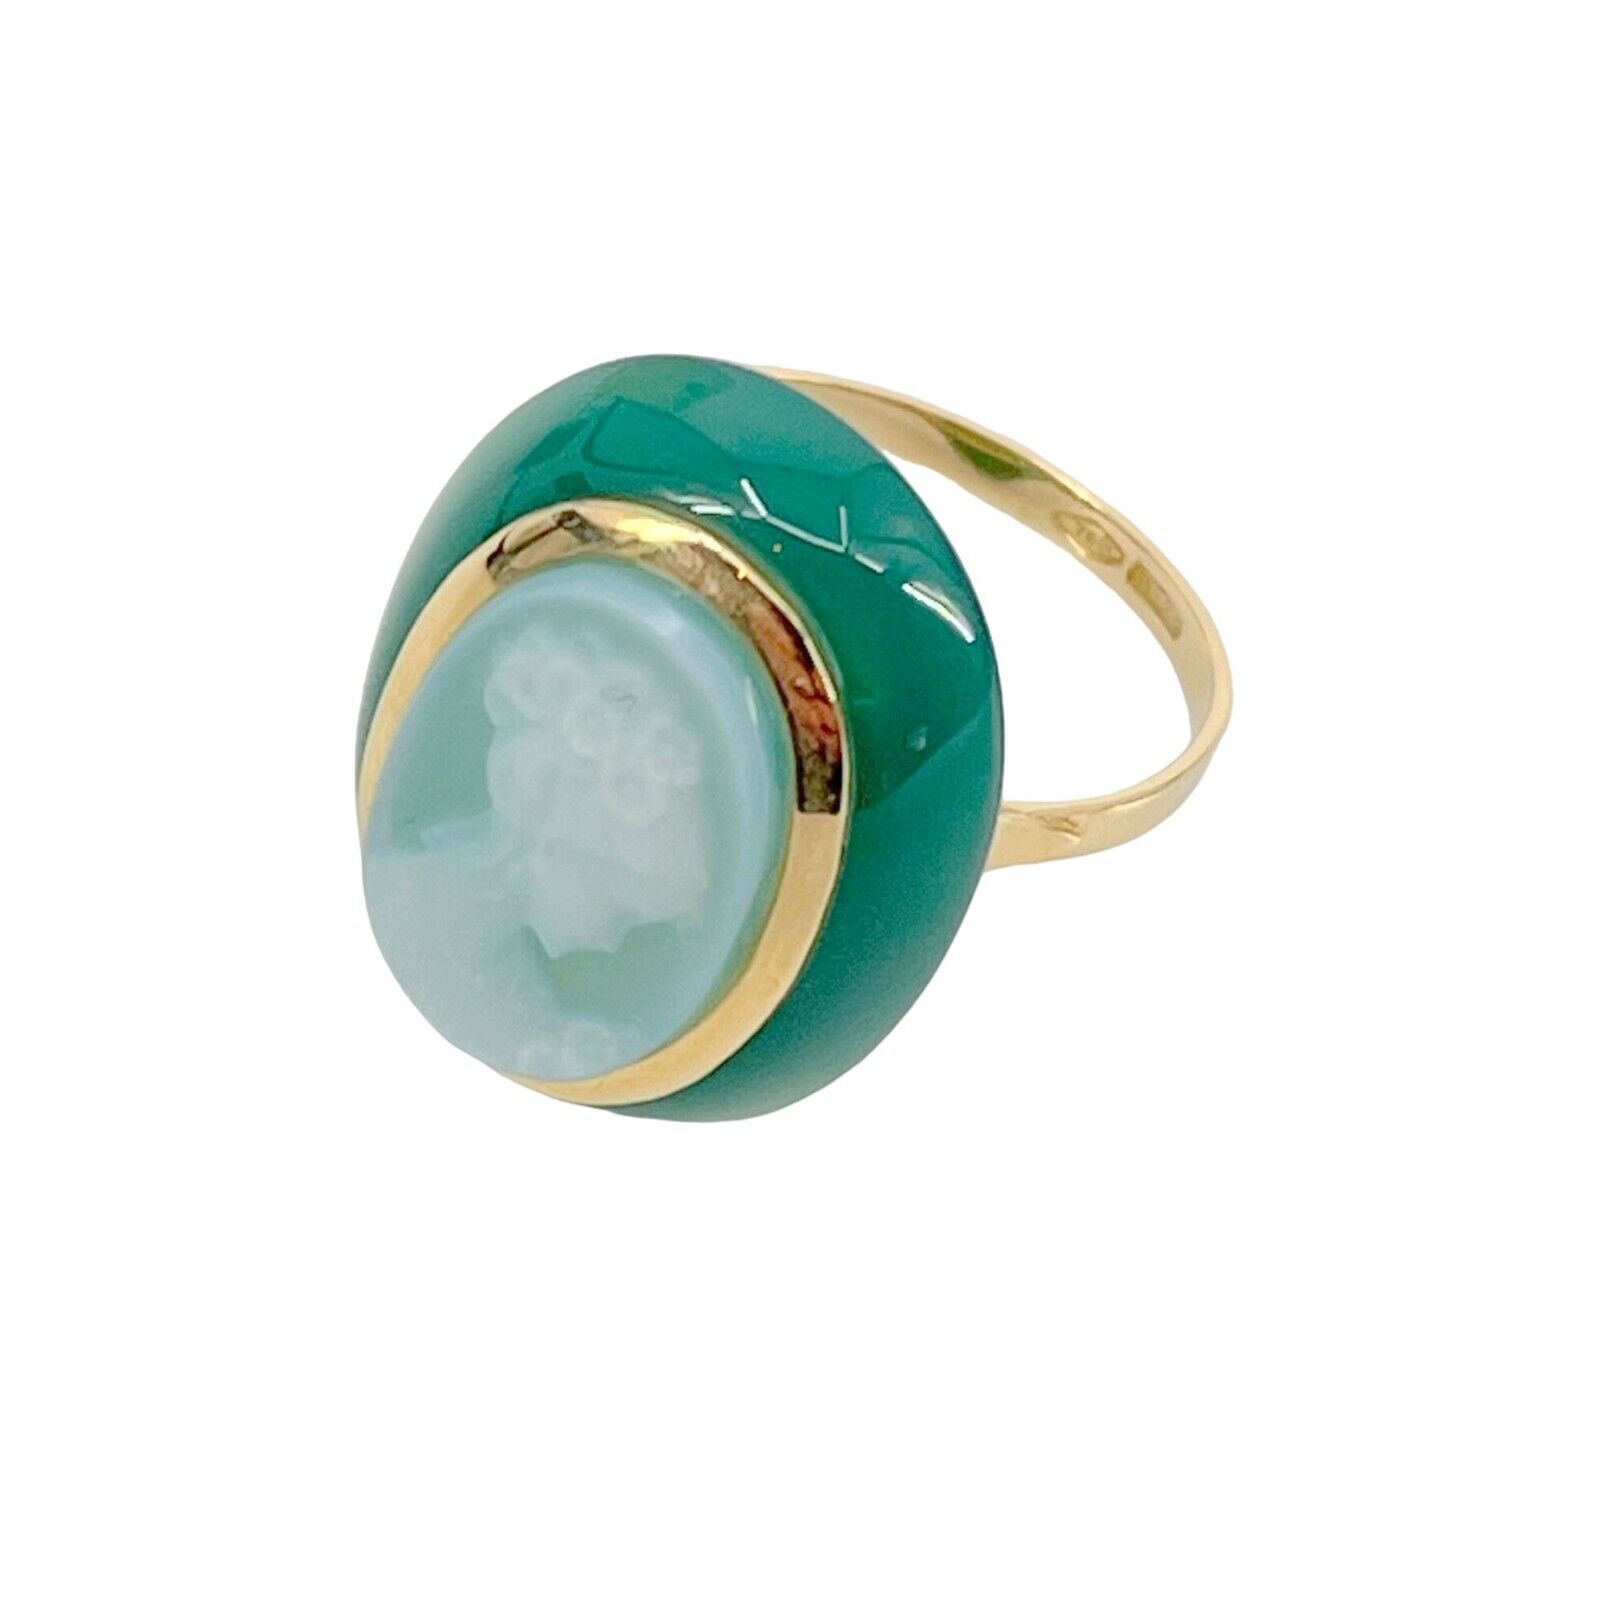 New Giovanni APA Green Agate Hand Carved Shell Cameo 18K Yellow Gold 750 Ring 6. Giovanni APA - фотография #6